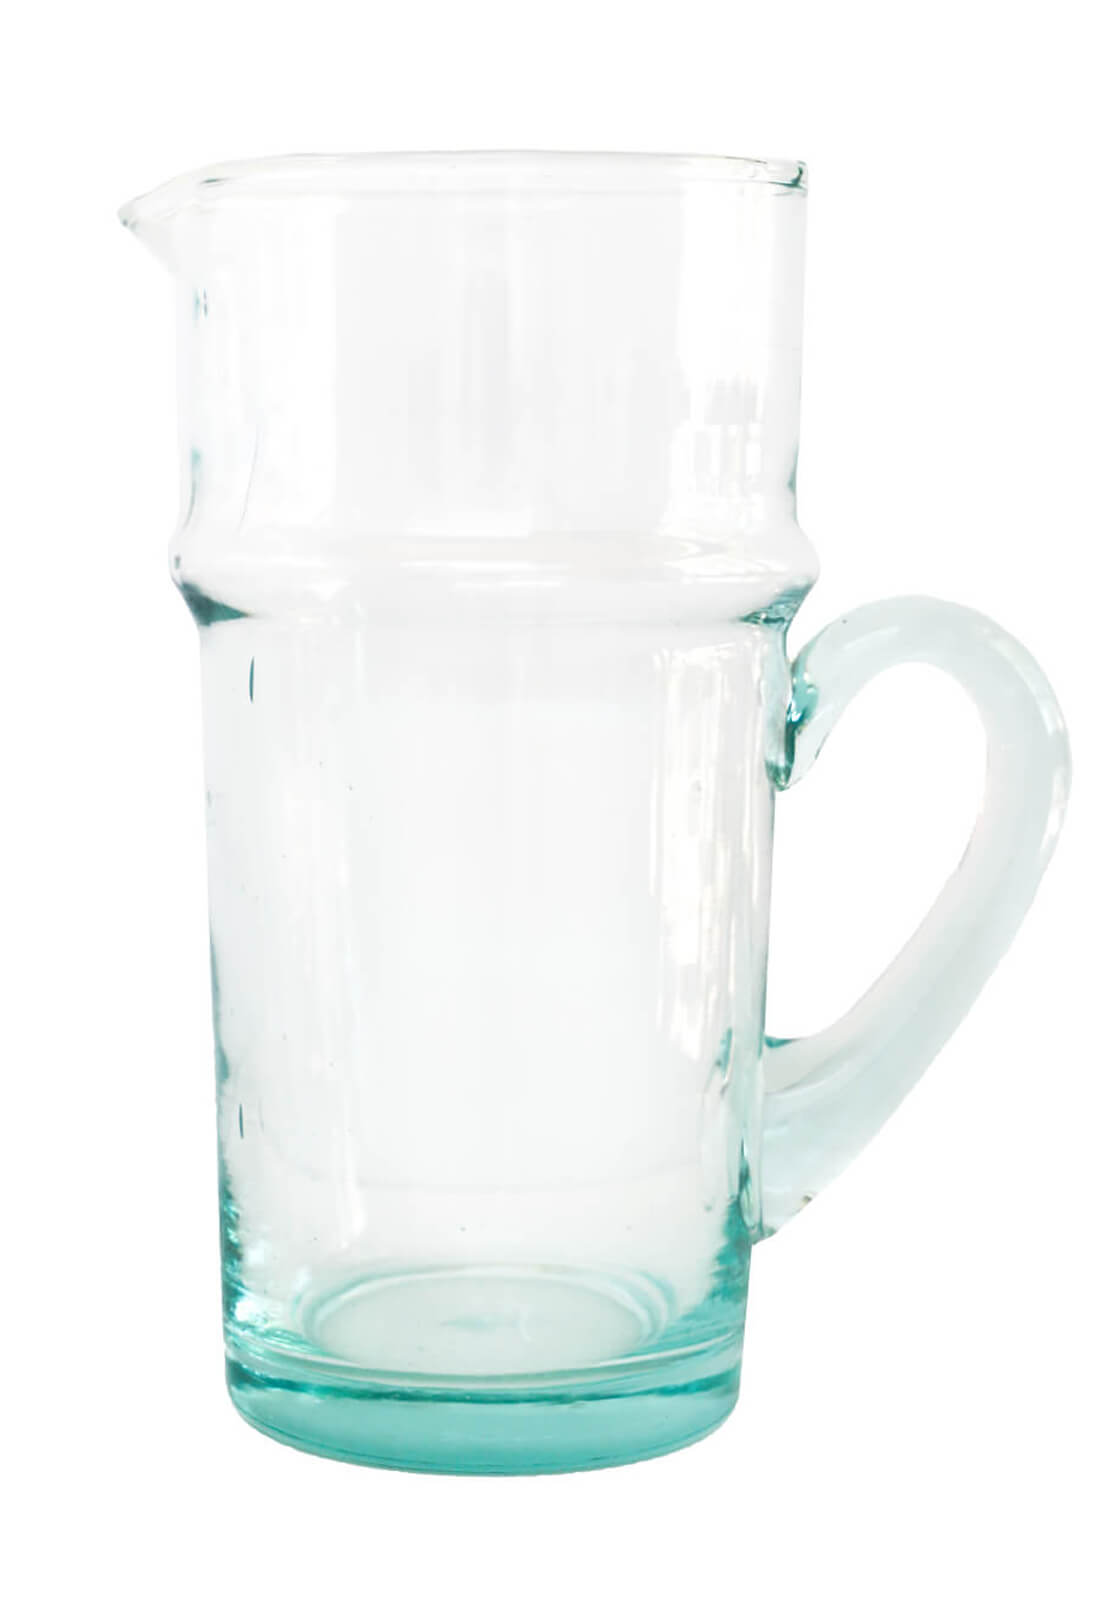 Recycled glass curvy pitcher with a handle, made in Morocco 